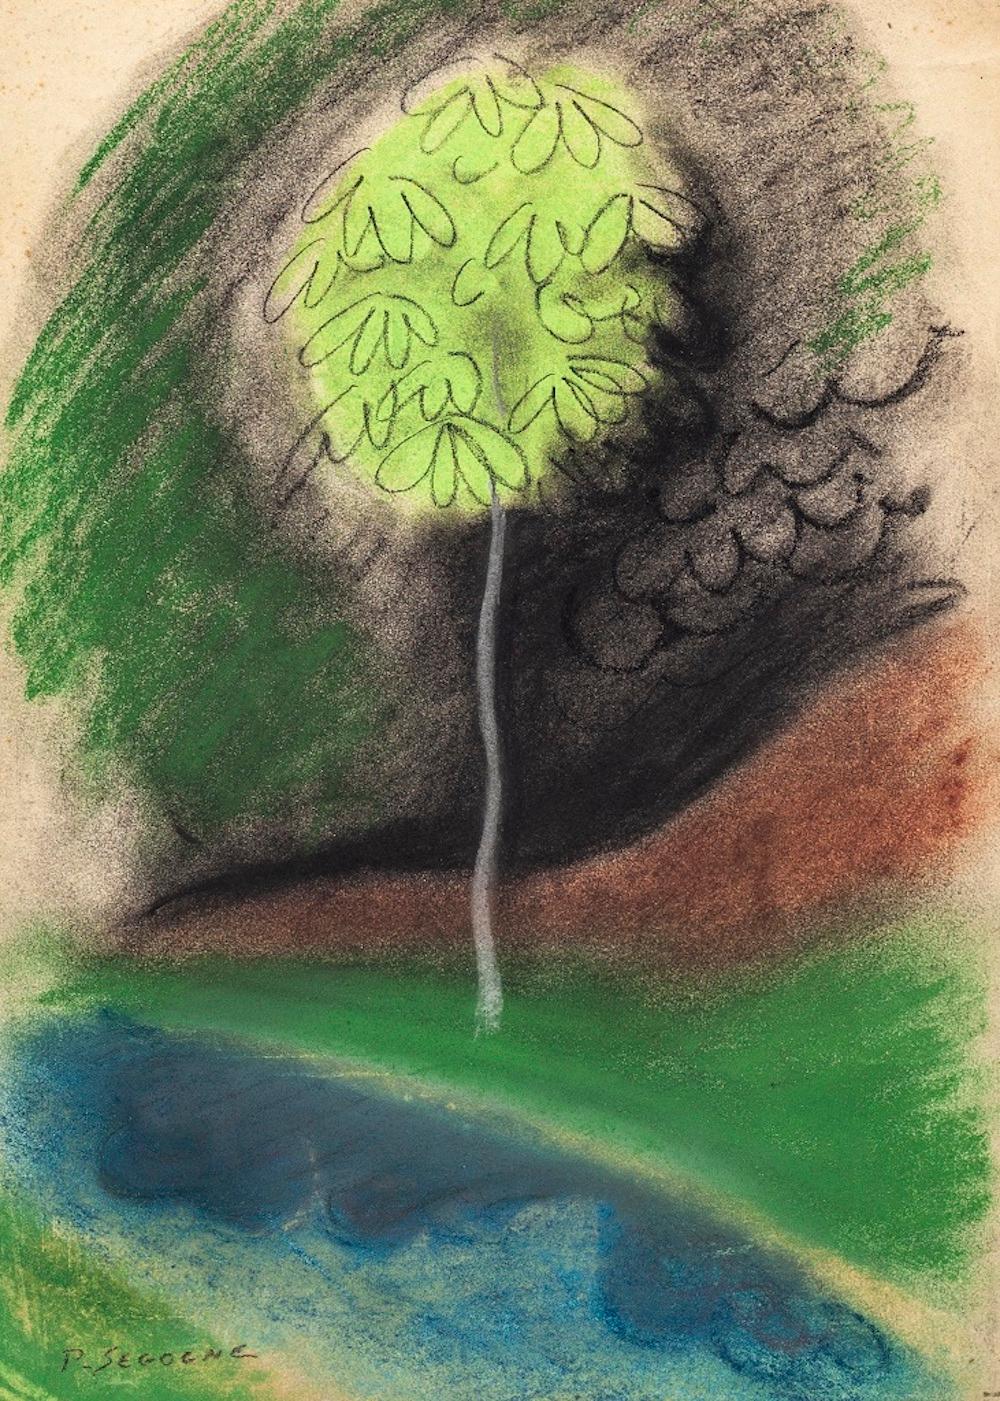 The Green Tree is an original contemporary artwork realized by the French artist Pierre Segogne in the second half of the XX Century. 

Original colored pastel on paper.

Hand-signed by the artist on the lower left corner: P.Segogne.

Mint